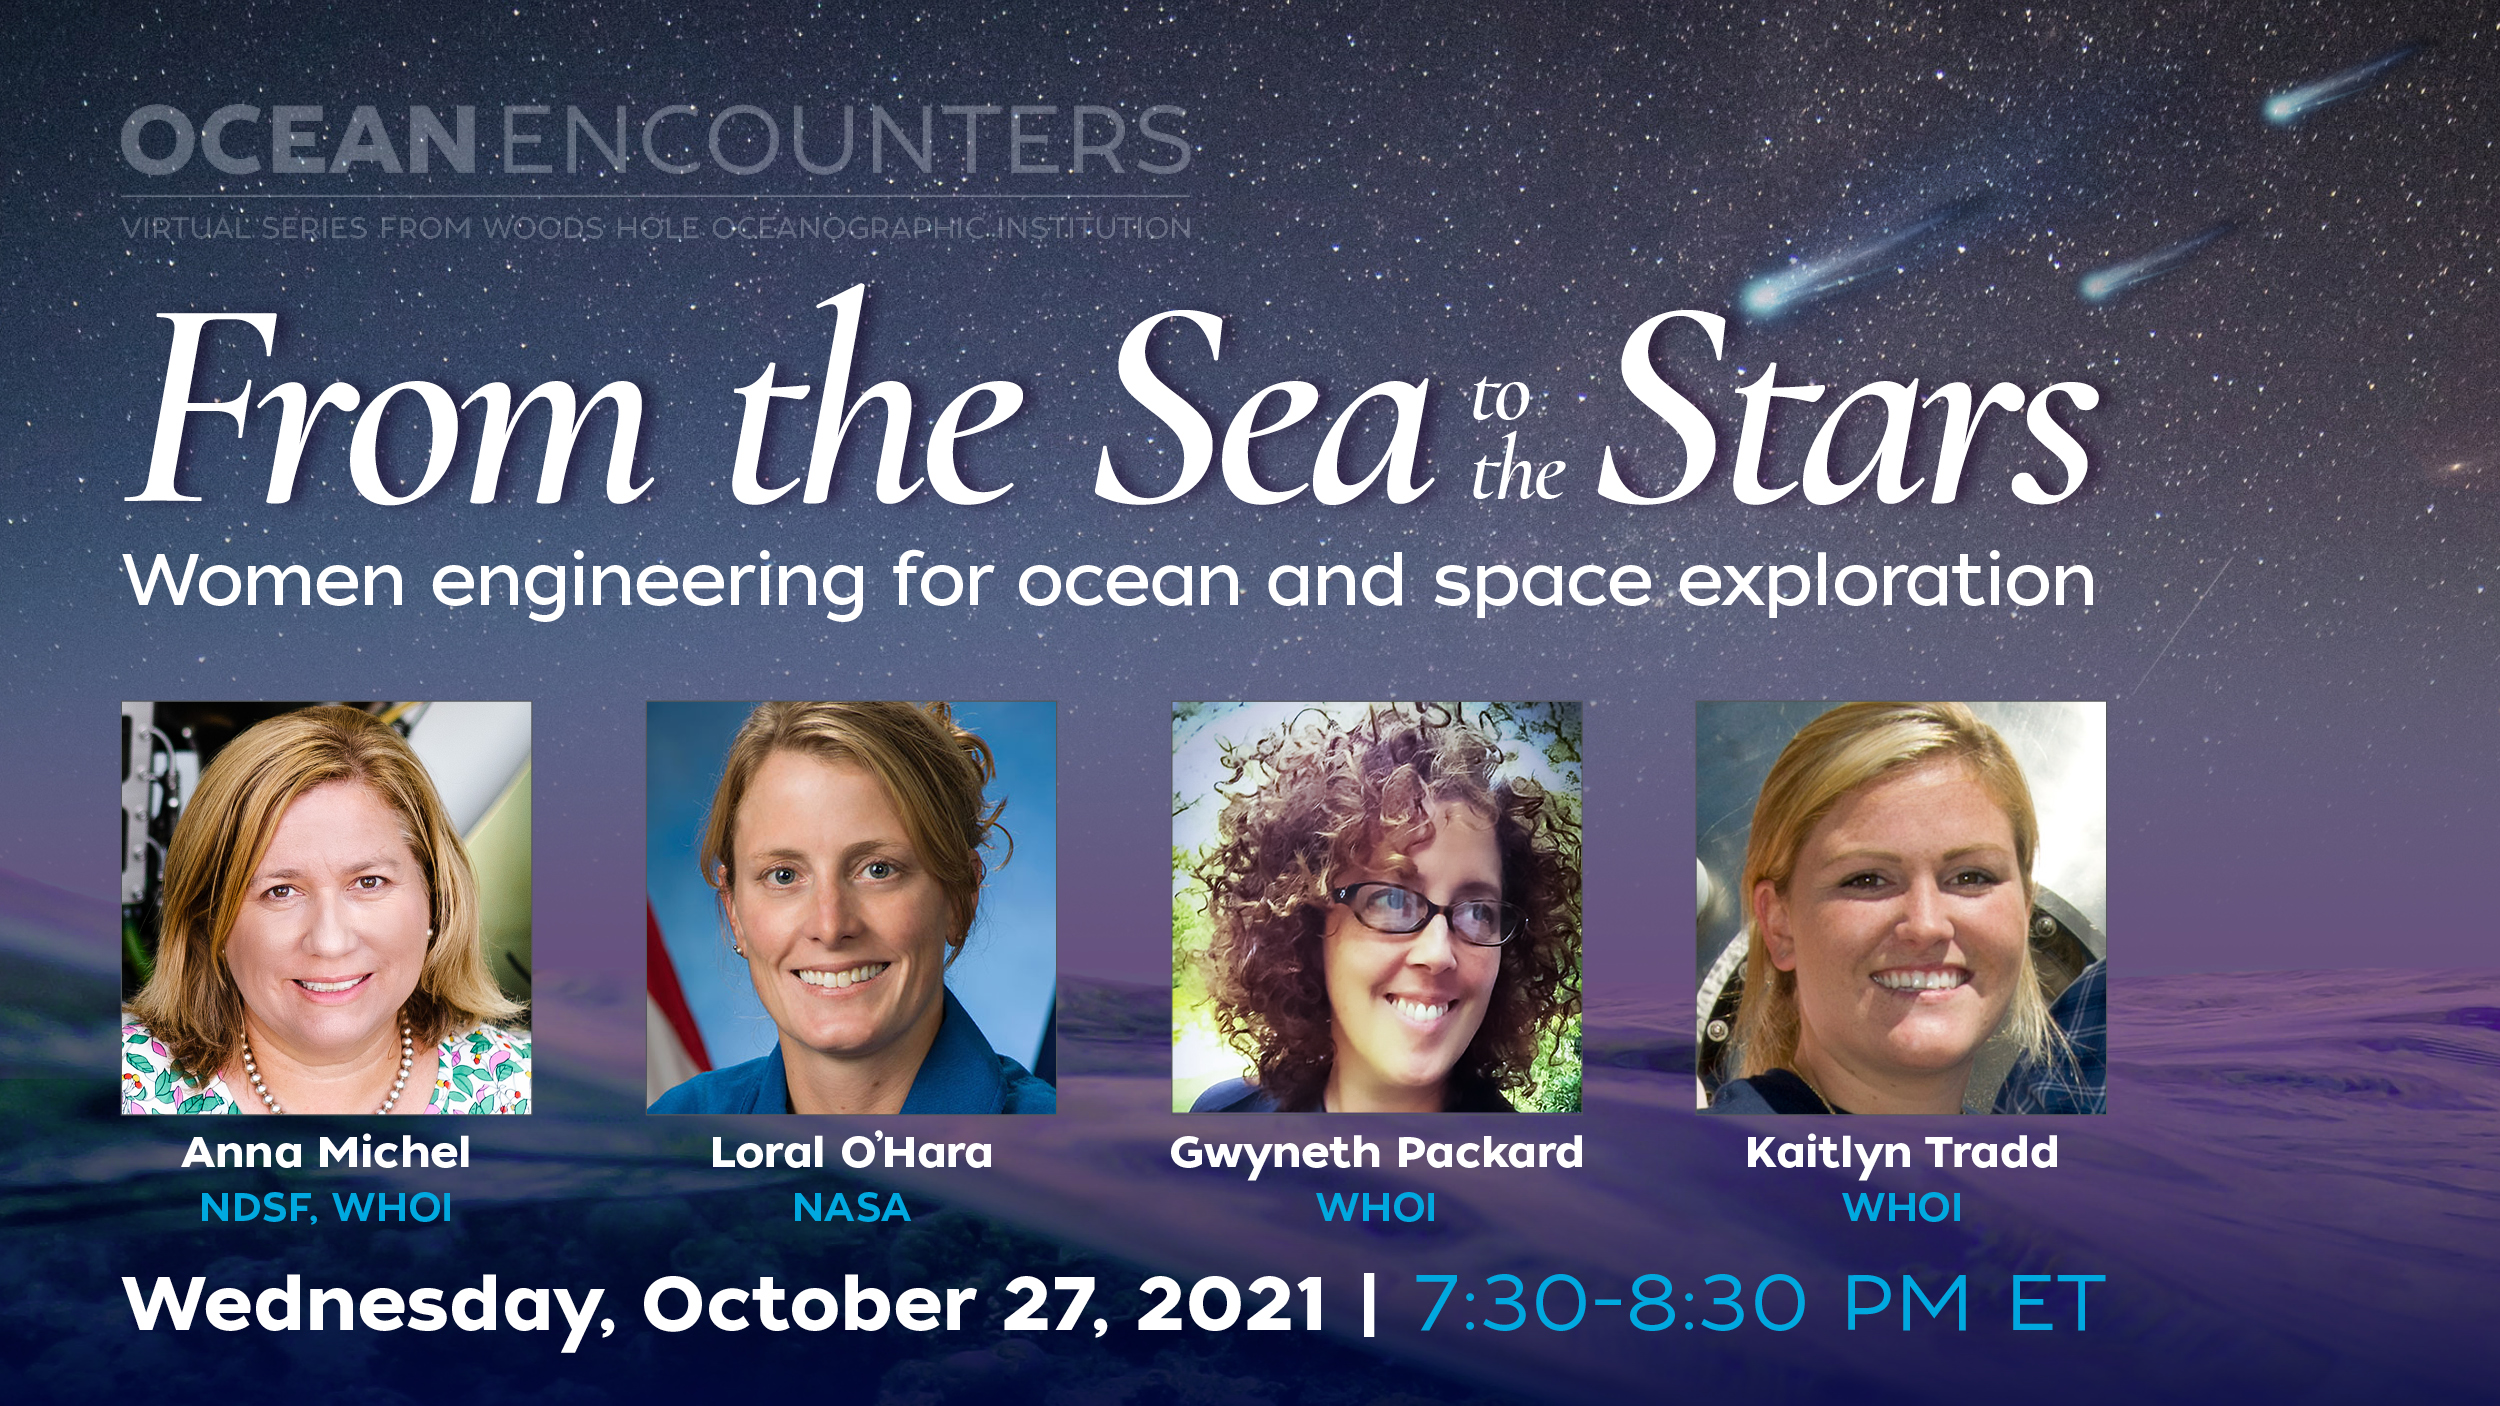 Flyer for From the Sea to the Stars - Ocean Encounters, originally set to air October 27, 2021, but postponed until early December 2021. There are photos of the four panelists, Dr. Anna Michelle, Astronaut Laurel O'Hara, Gwyneth Packard, and Kaitlyn Tradd.